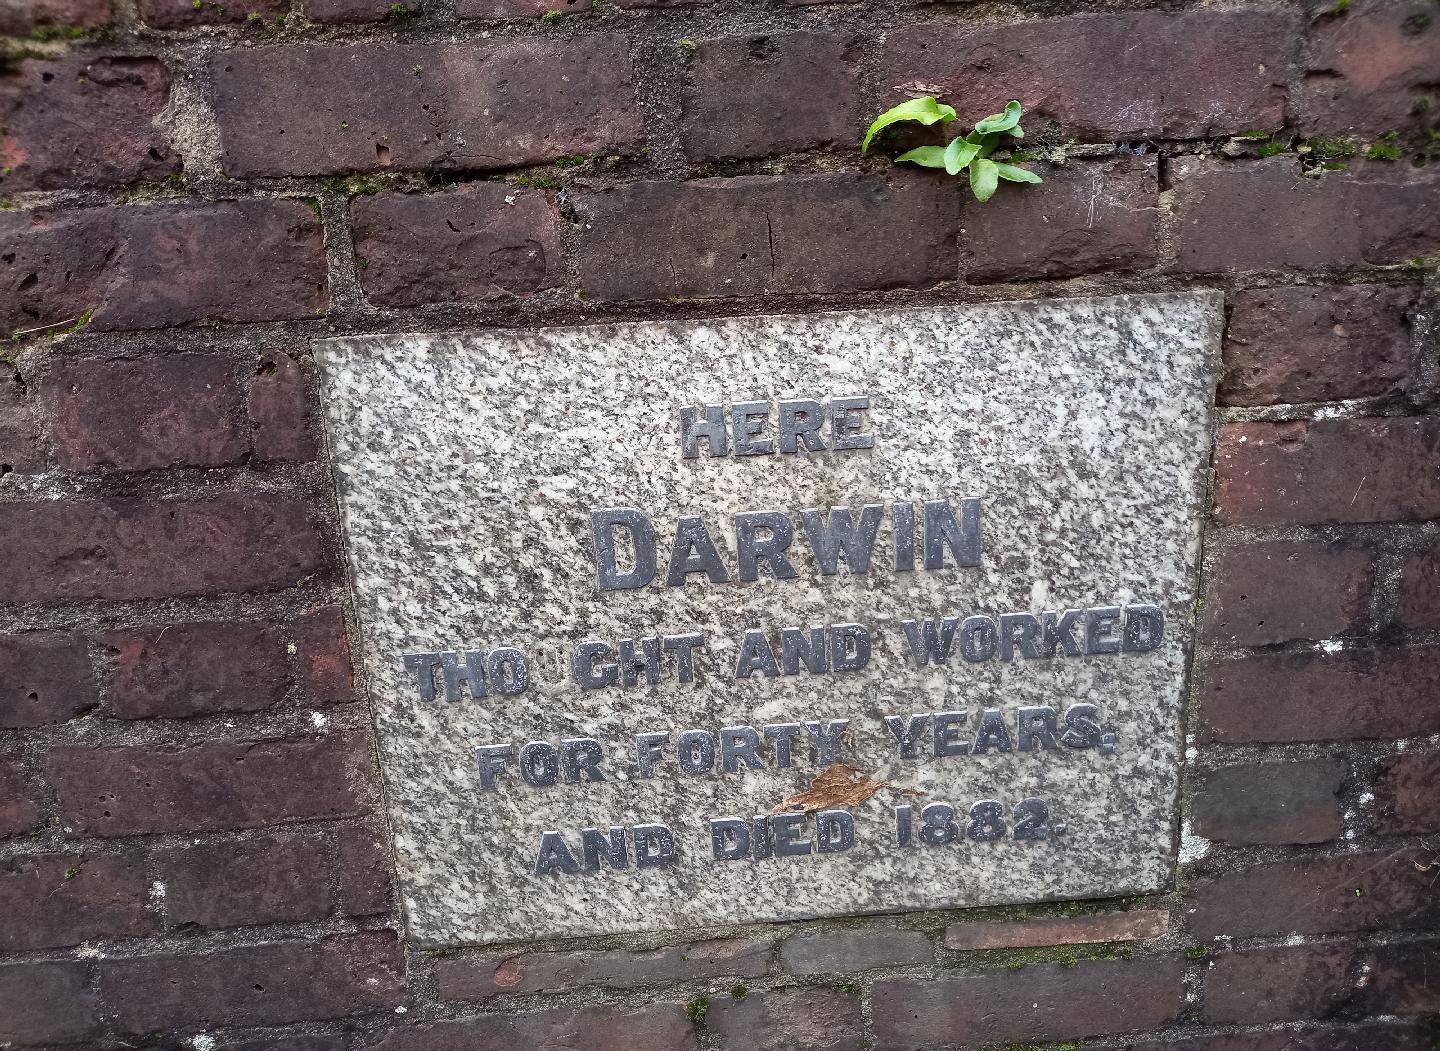 Stone in brick wall announcing Darwin's residence.